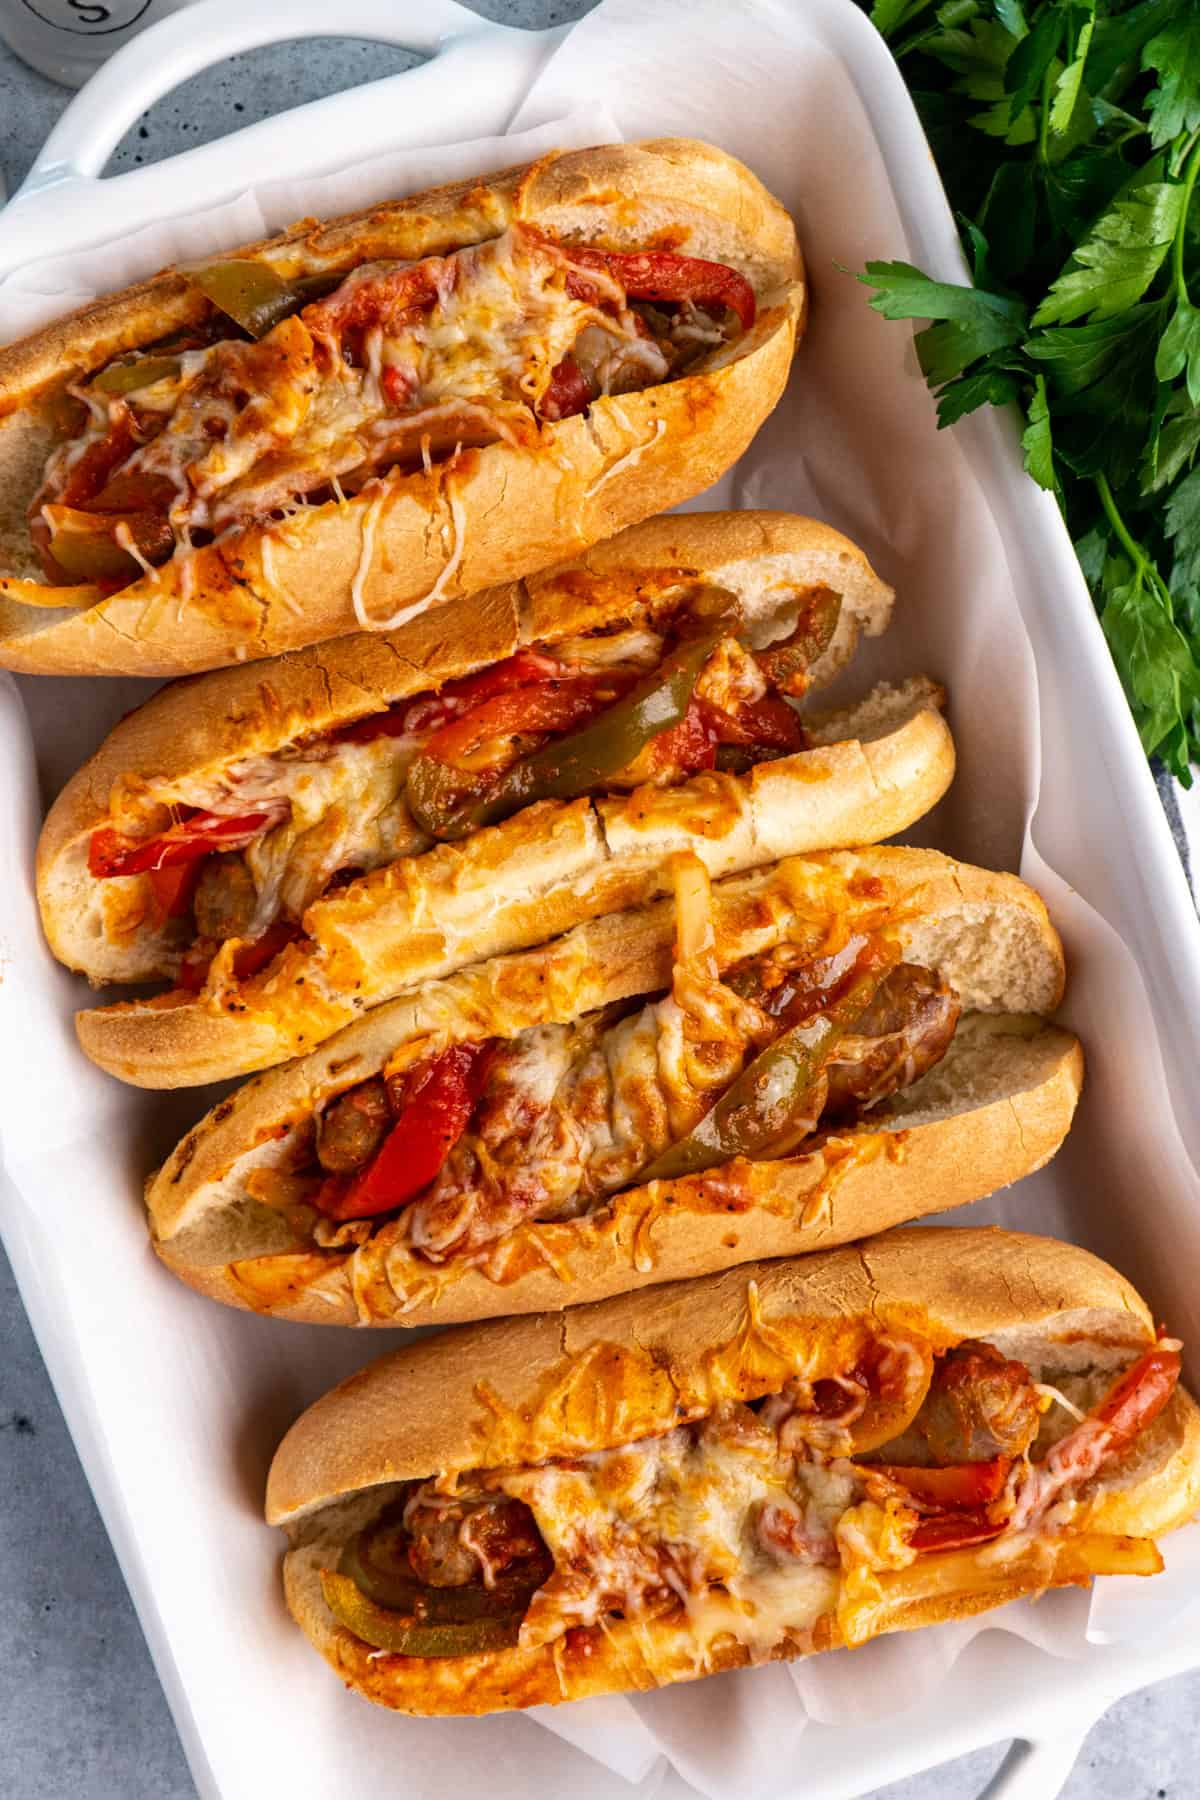 Overhead look at crock pot sausage and peppers in hoagies covered in cheese inside a baking dish.